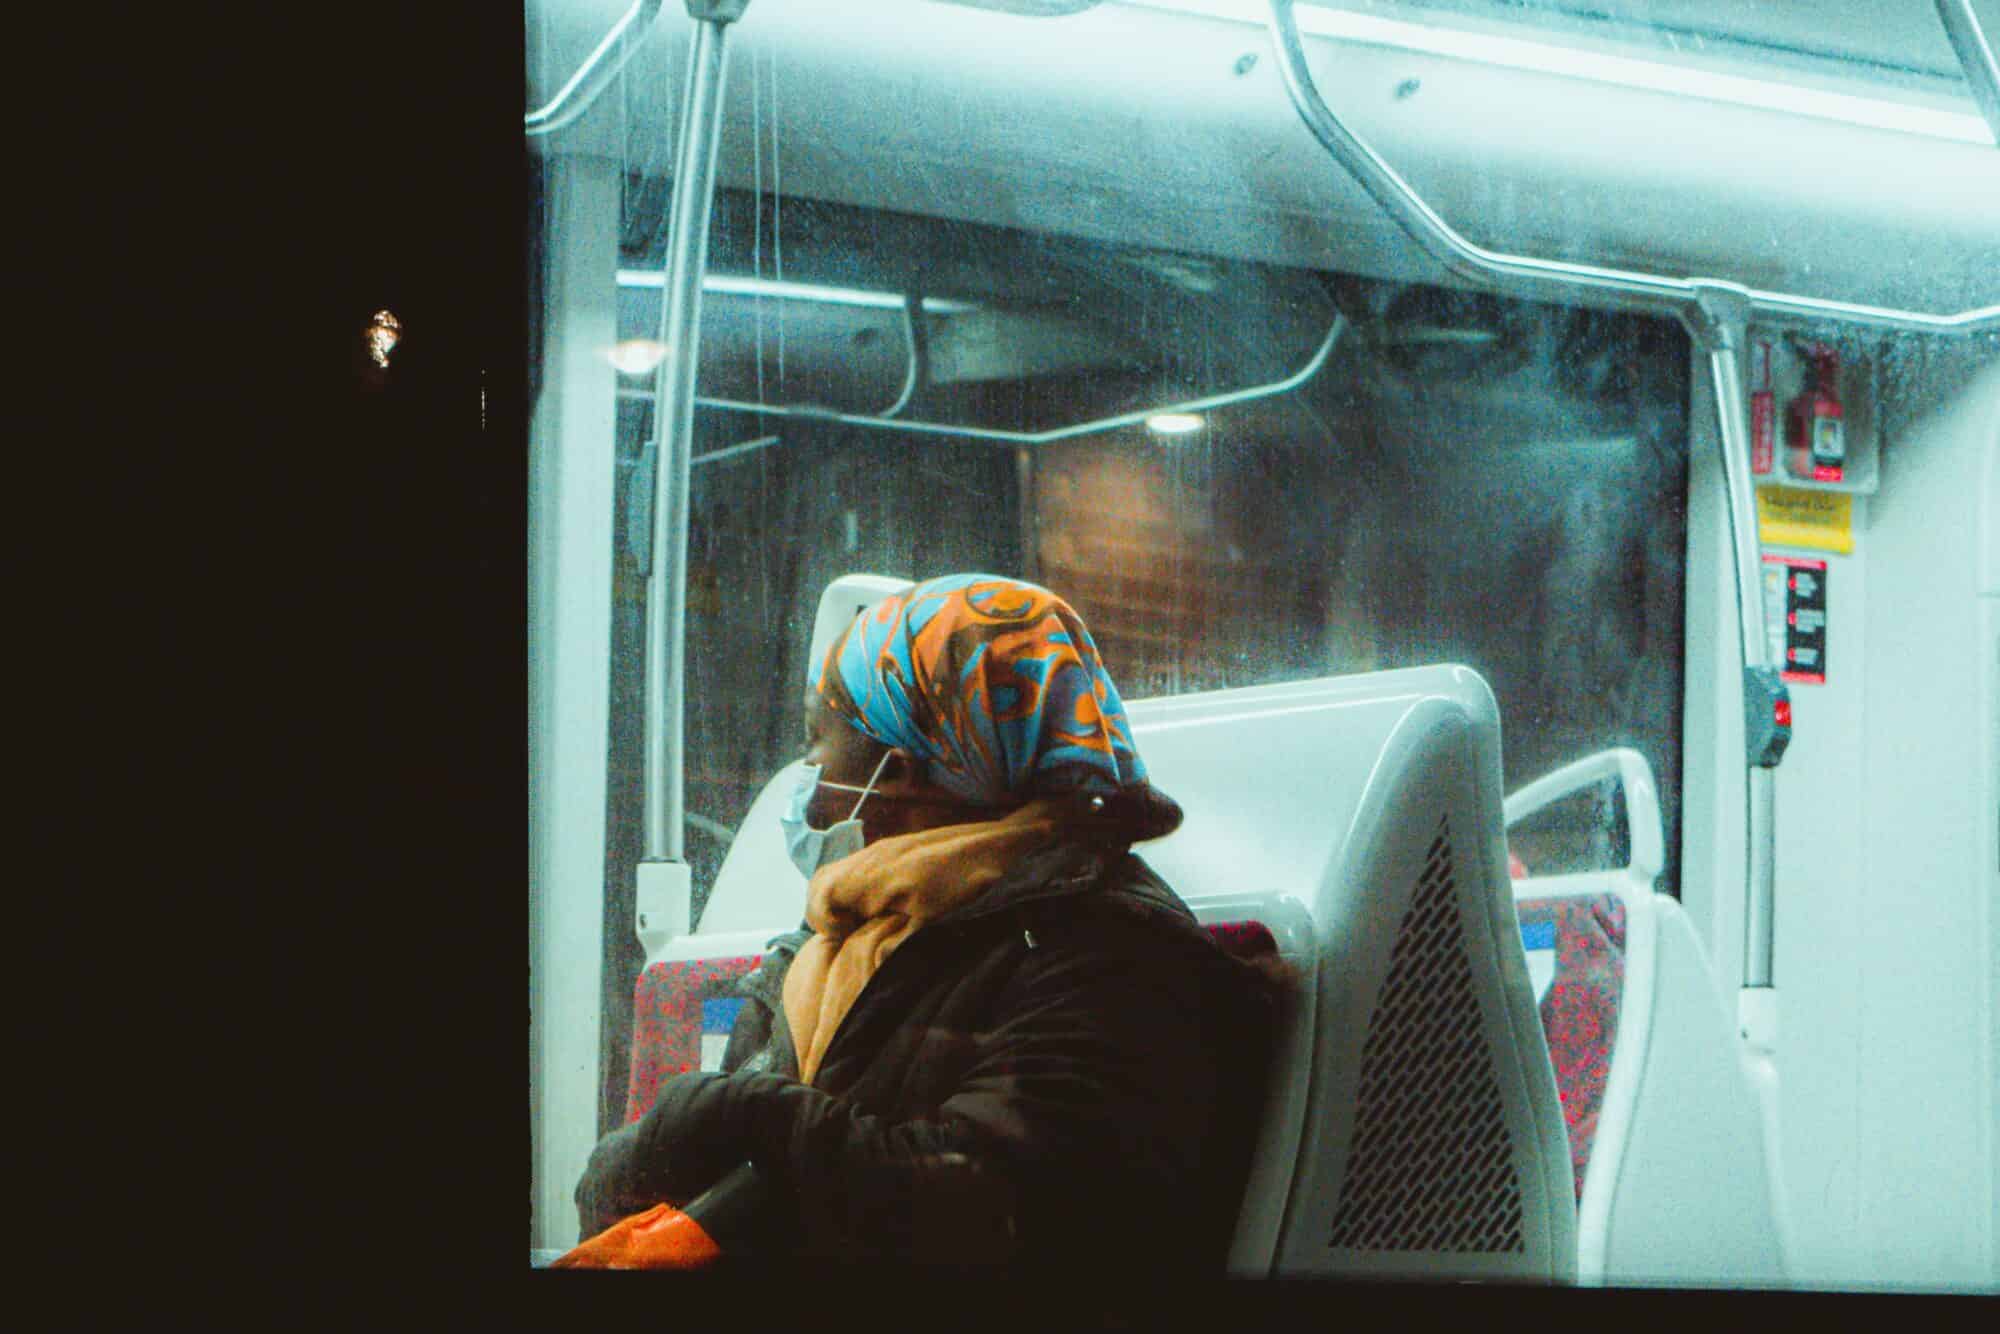 A TTC passenger wearing a surgical mask sits in a TTC streetcar.